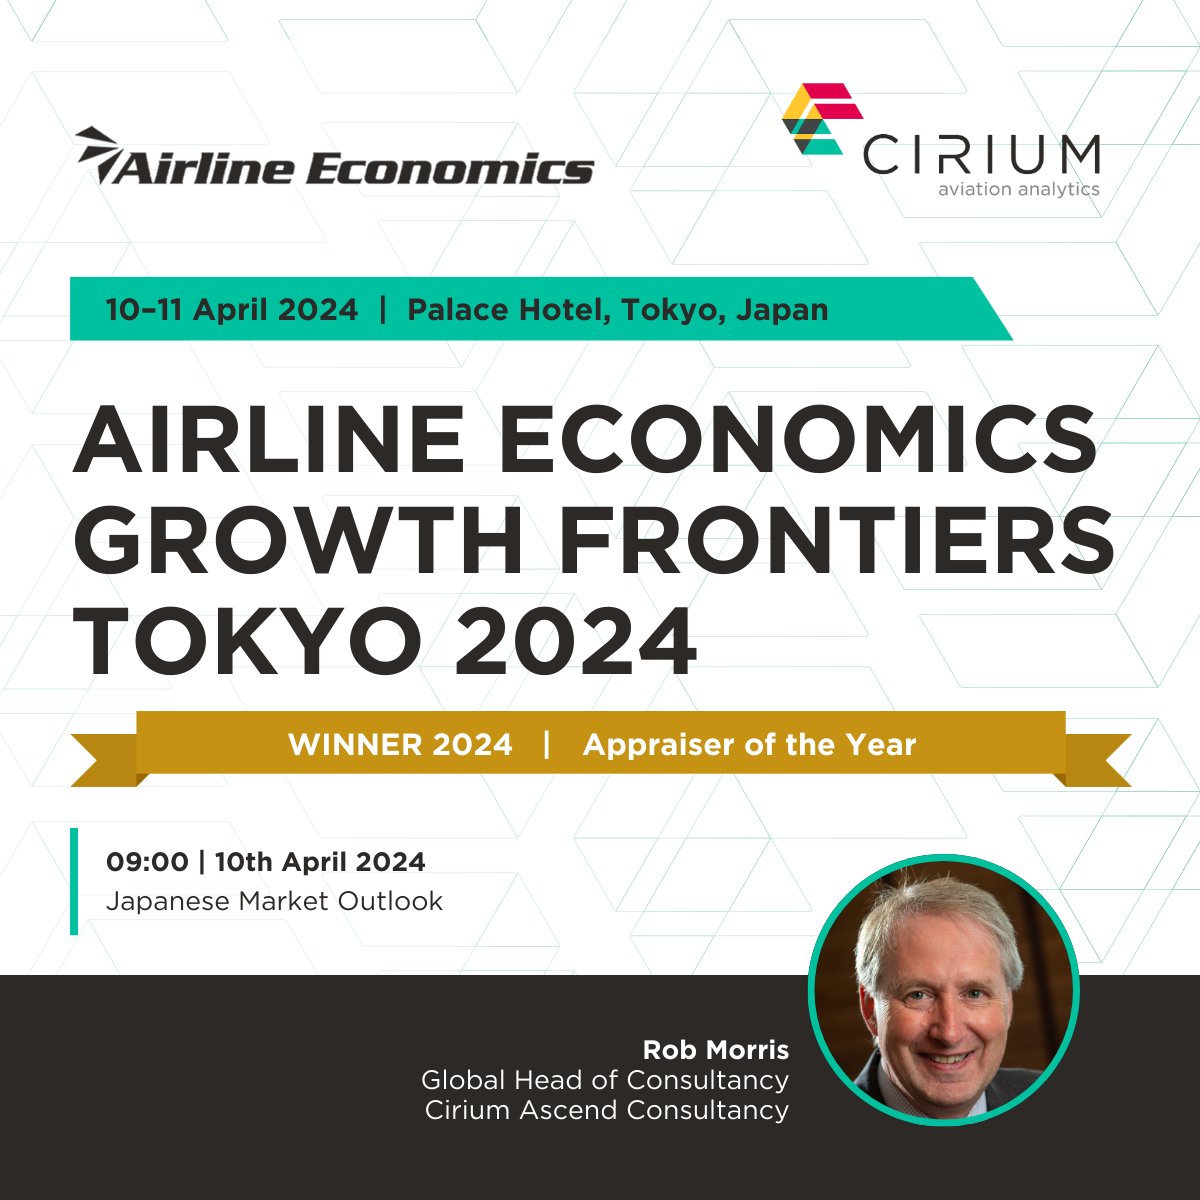 Hear from the Award Winning Cirium Ascend Consultancy team at #AETokyo24. Join Rob Morris, @HertsRoyal, for a detailed analysis and sector overview. Looking forward to seeing you there. More info: cirium.com/resources/avia… #AviationIndustry #Aviation #AirlineEconomics #aircraft